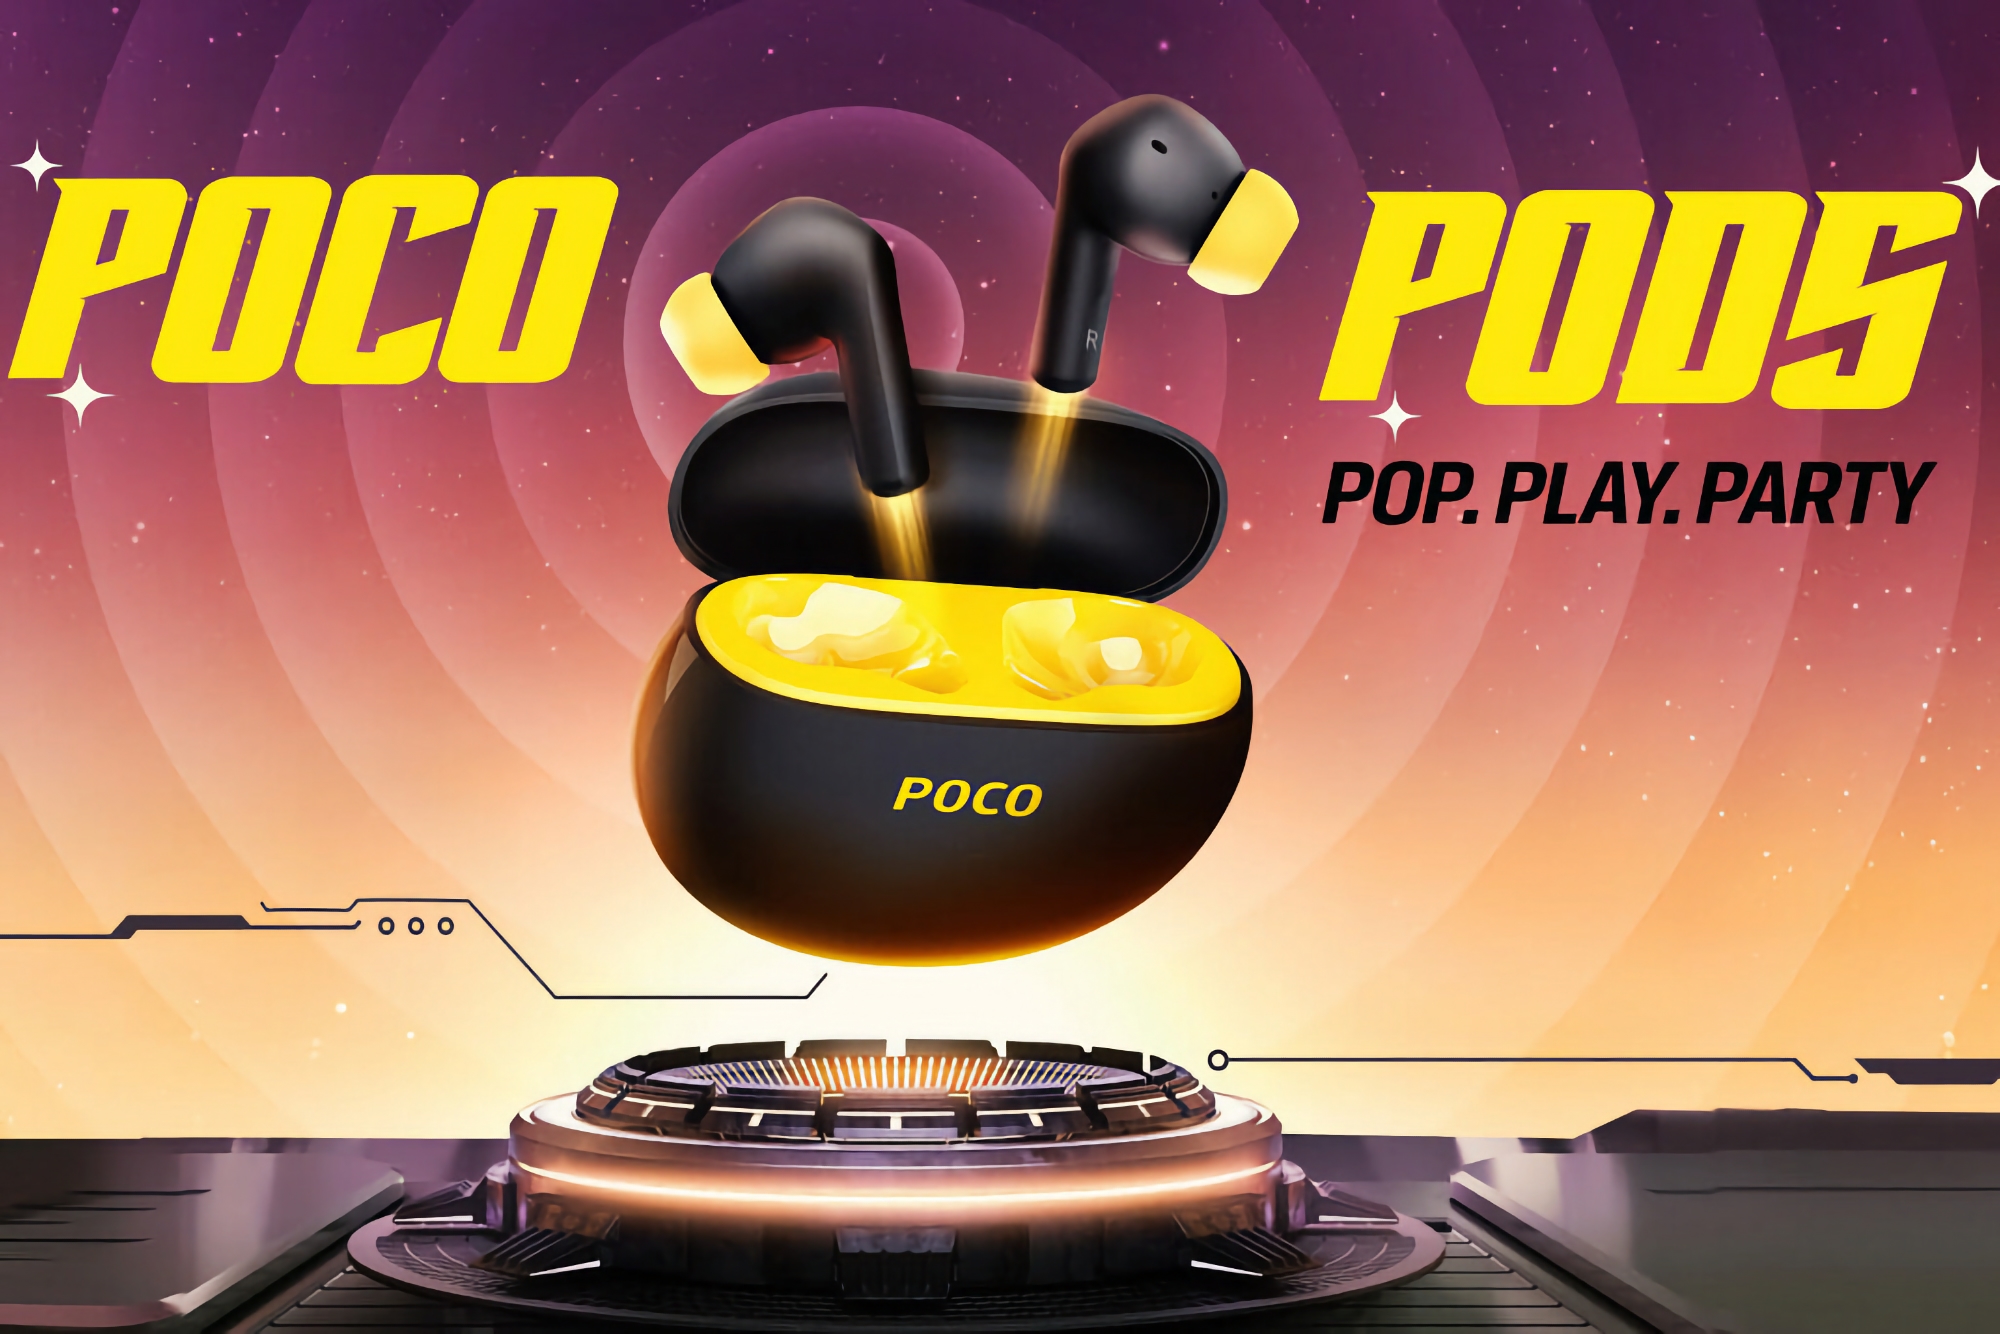 Xiaomi will unveil POCO Pods on July 29: TWS earphones with Bluetooth 5.3, IPX4 protection and up to 30 hours of battery life